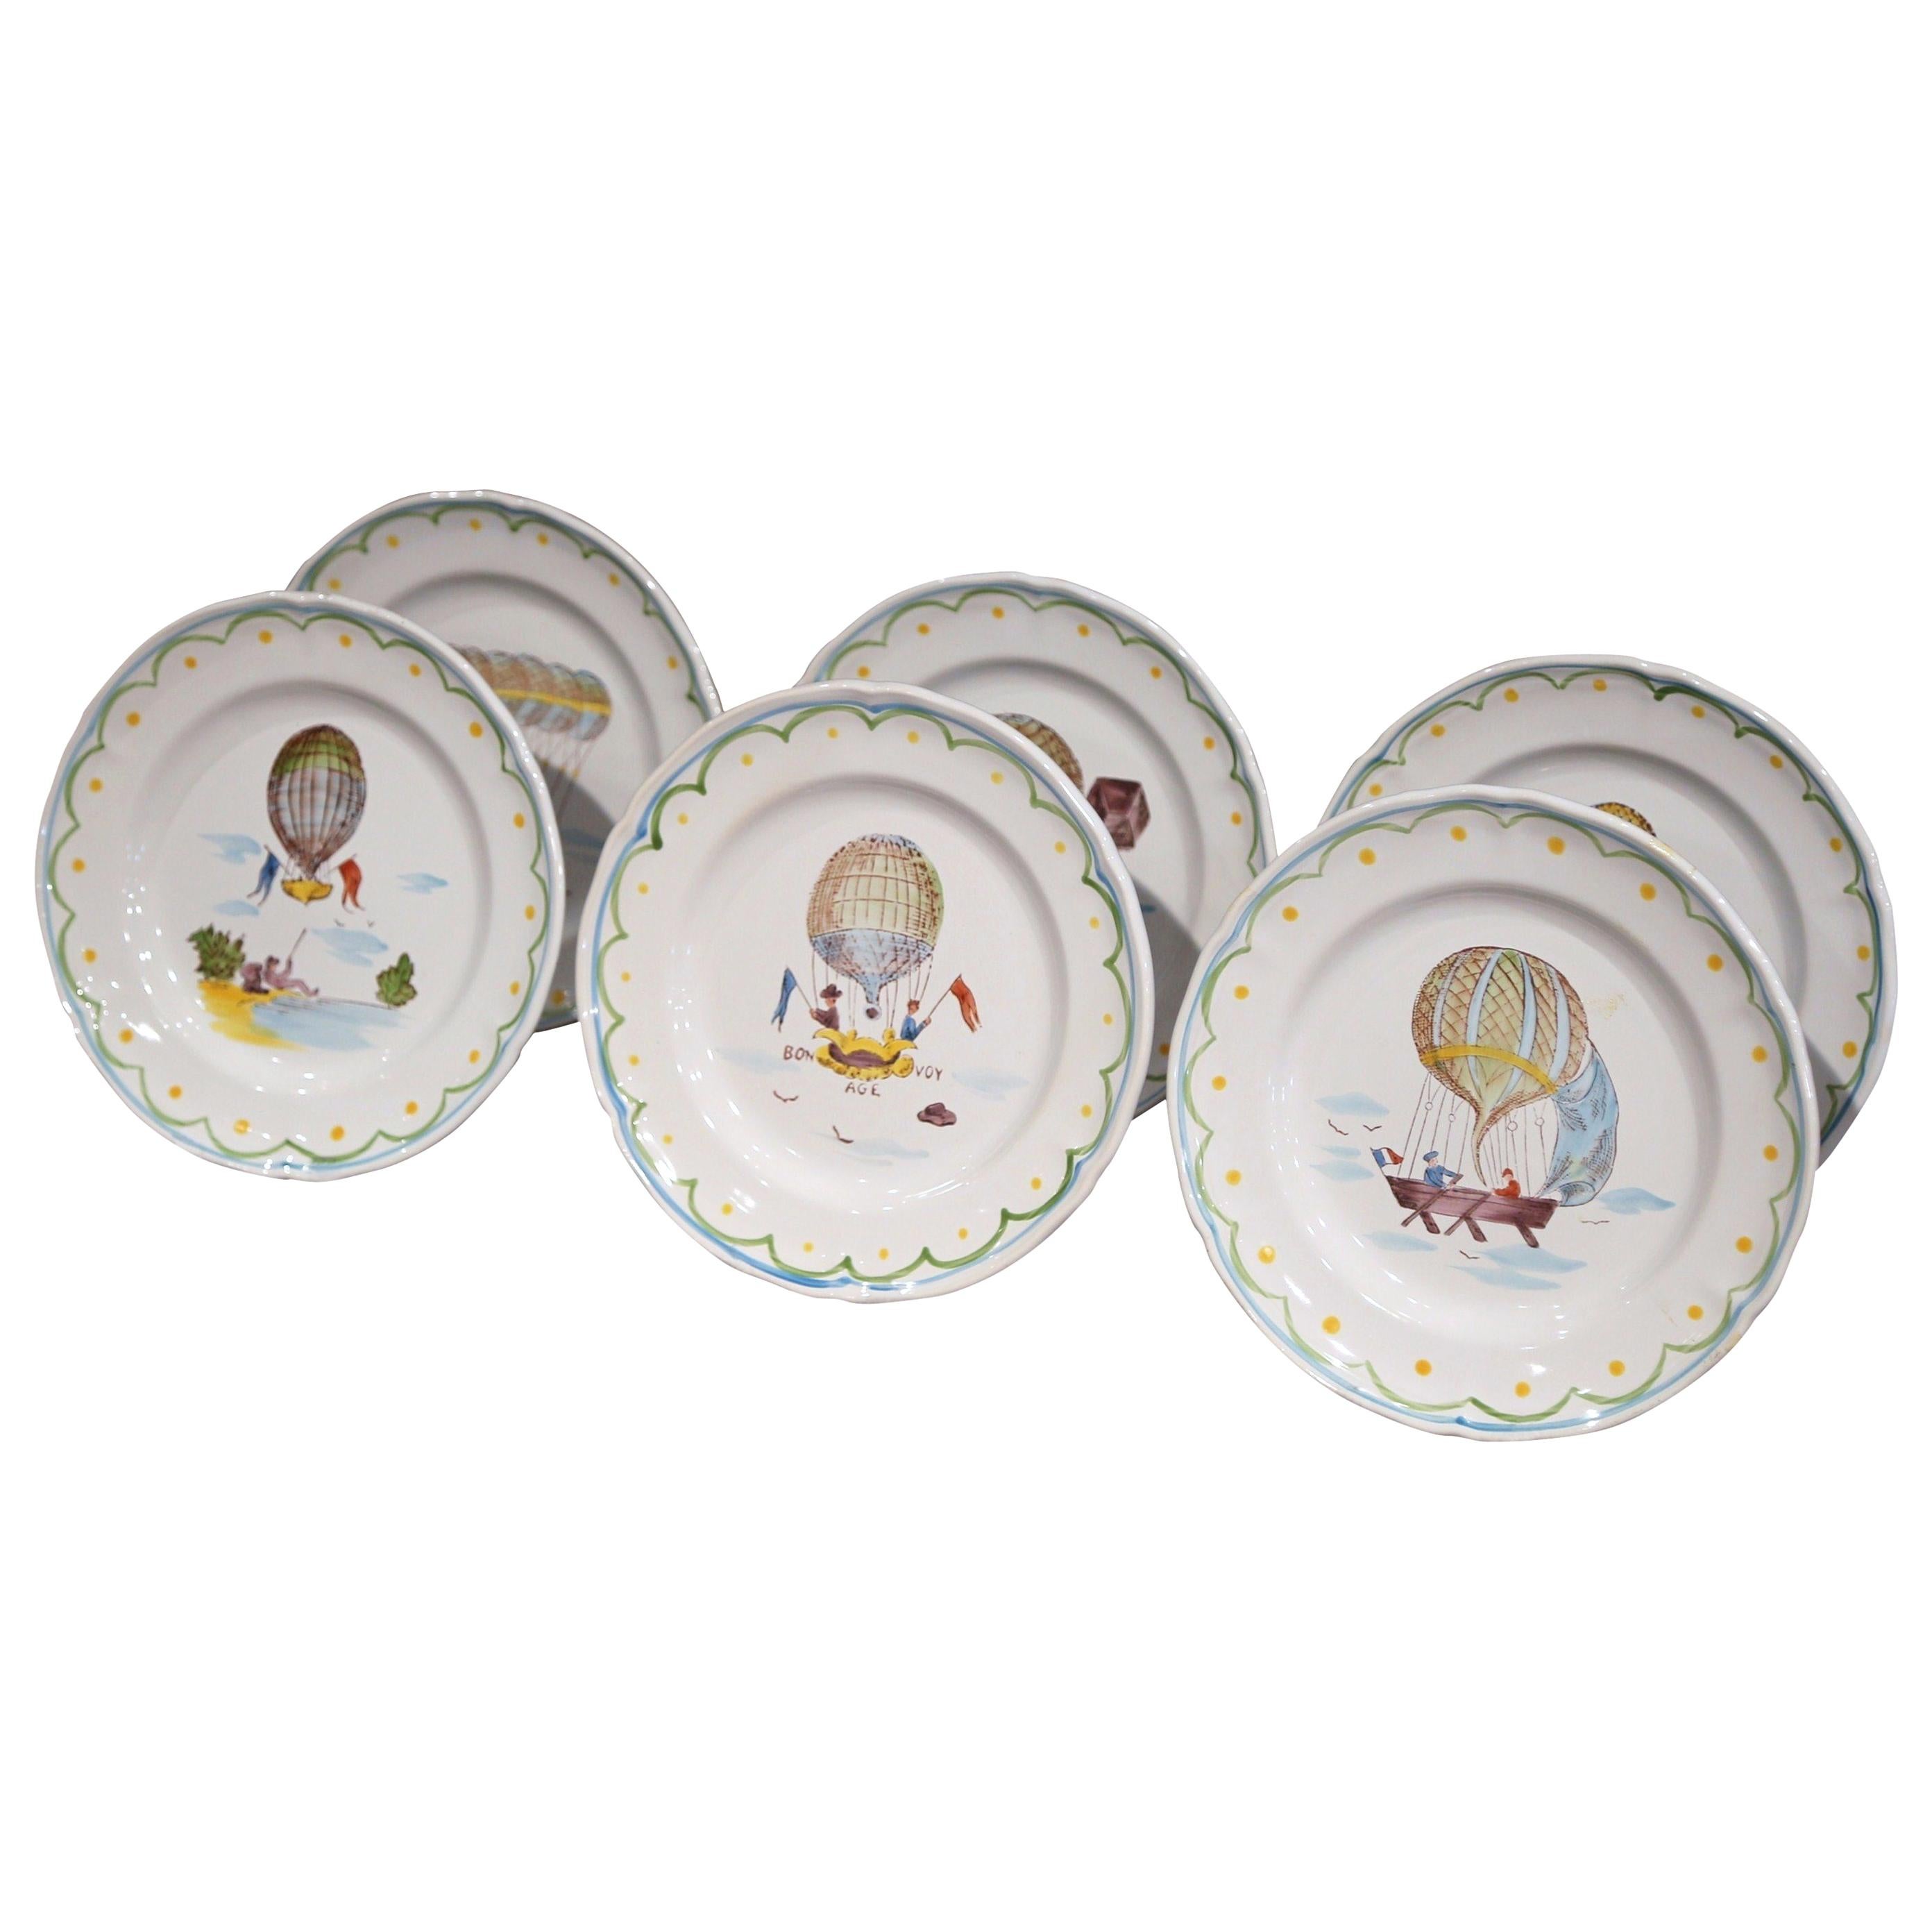 Set of Six French Hand-Painted Ceramic Hot Air Balloon Plates from Brittany